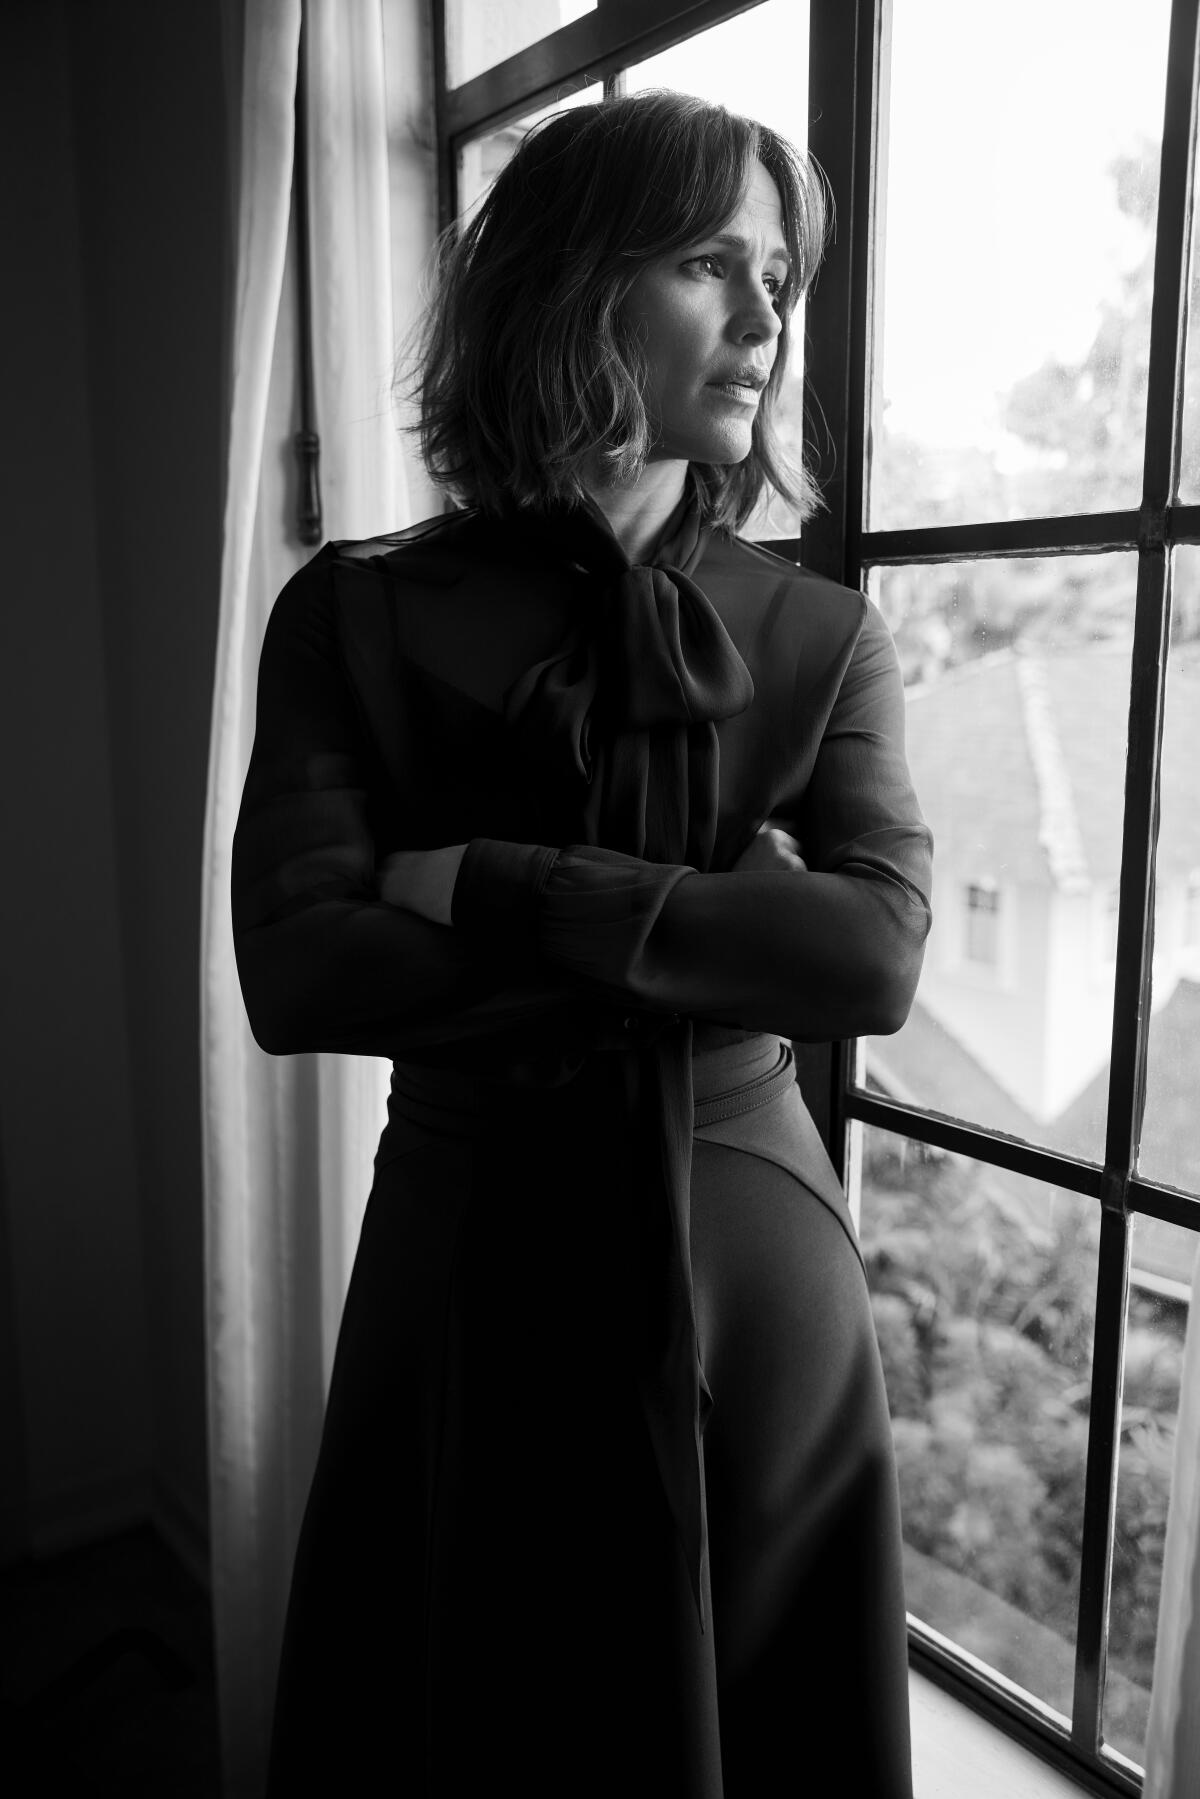 Jennifer Garner looks out a window in a black and white portrait.